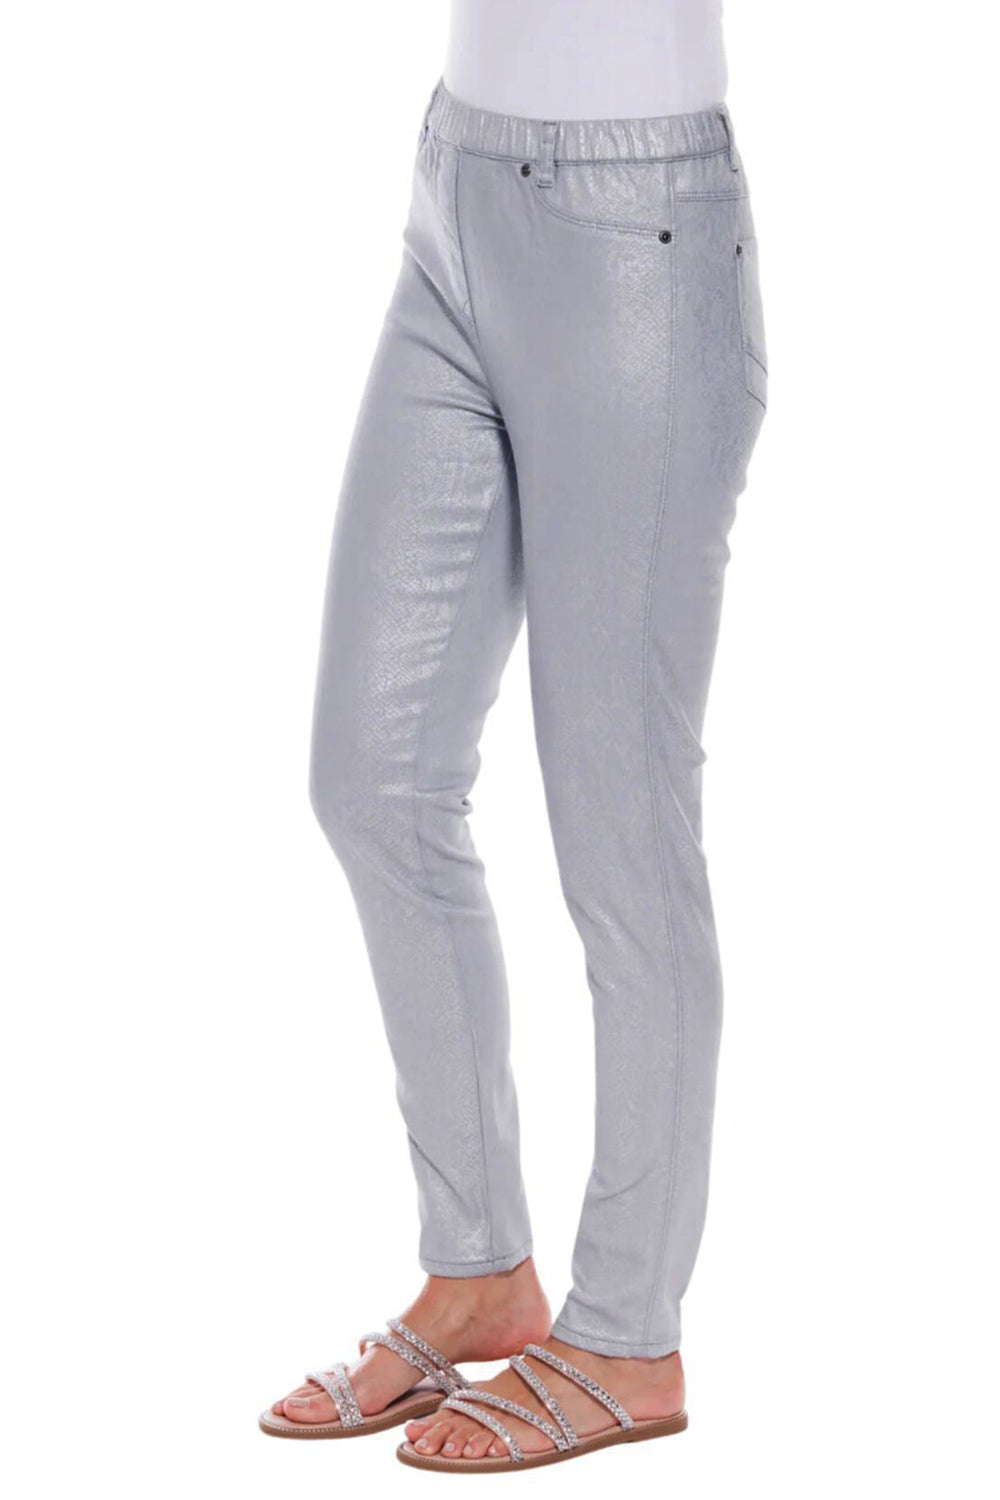 Woman wearing silver foil pants by Cafe Latte Clothing, sold and shipped from Pizazz Boutique online women's clothes shops Australia